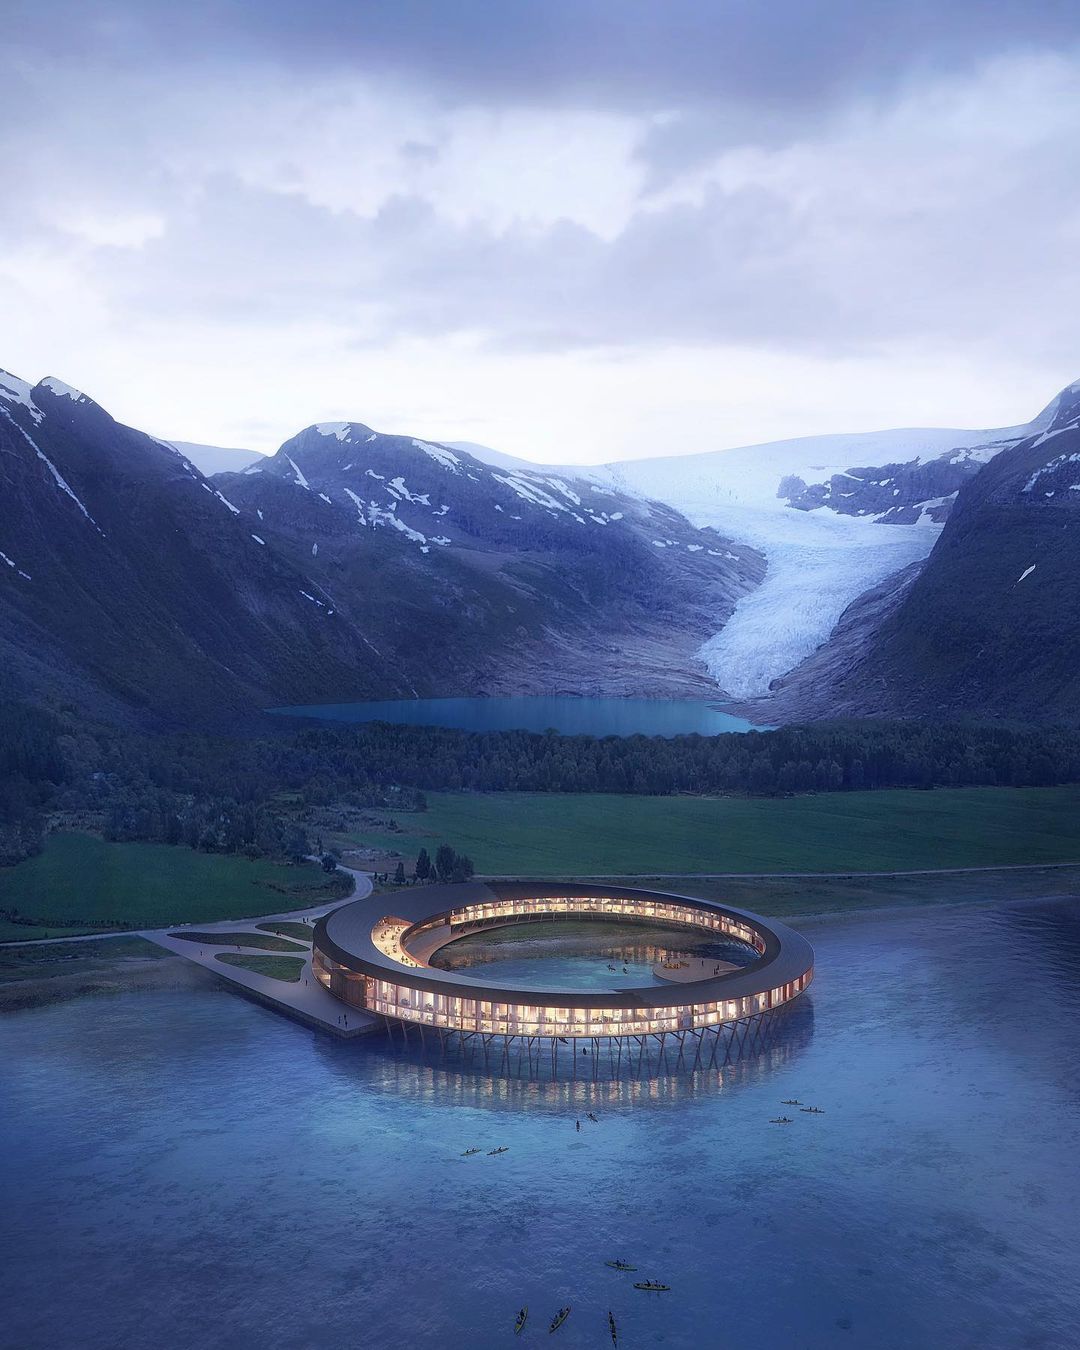 The circular Svart Hotel sits on a glacier lake, with light on inside and grey atmospheric skies and mountains in the background